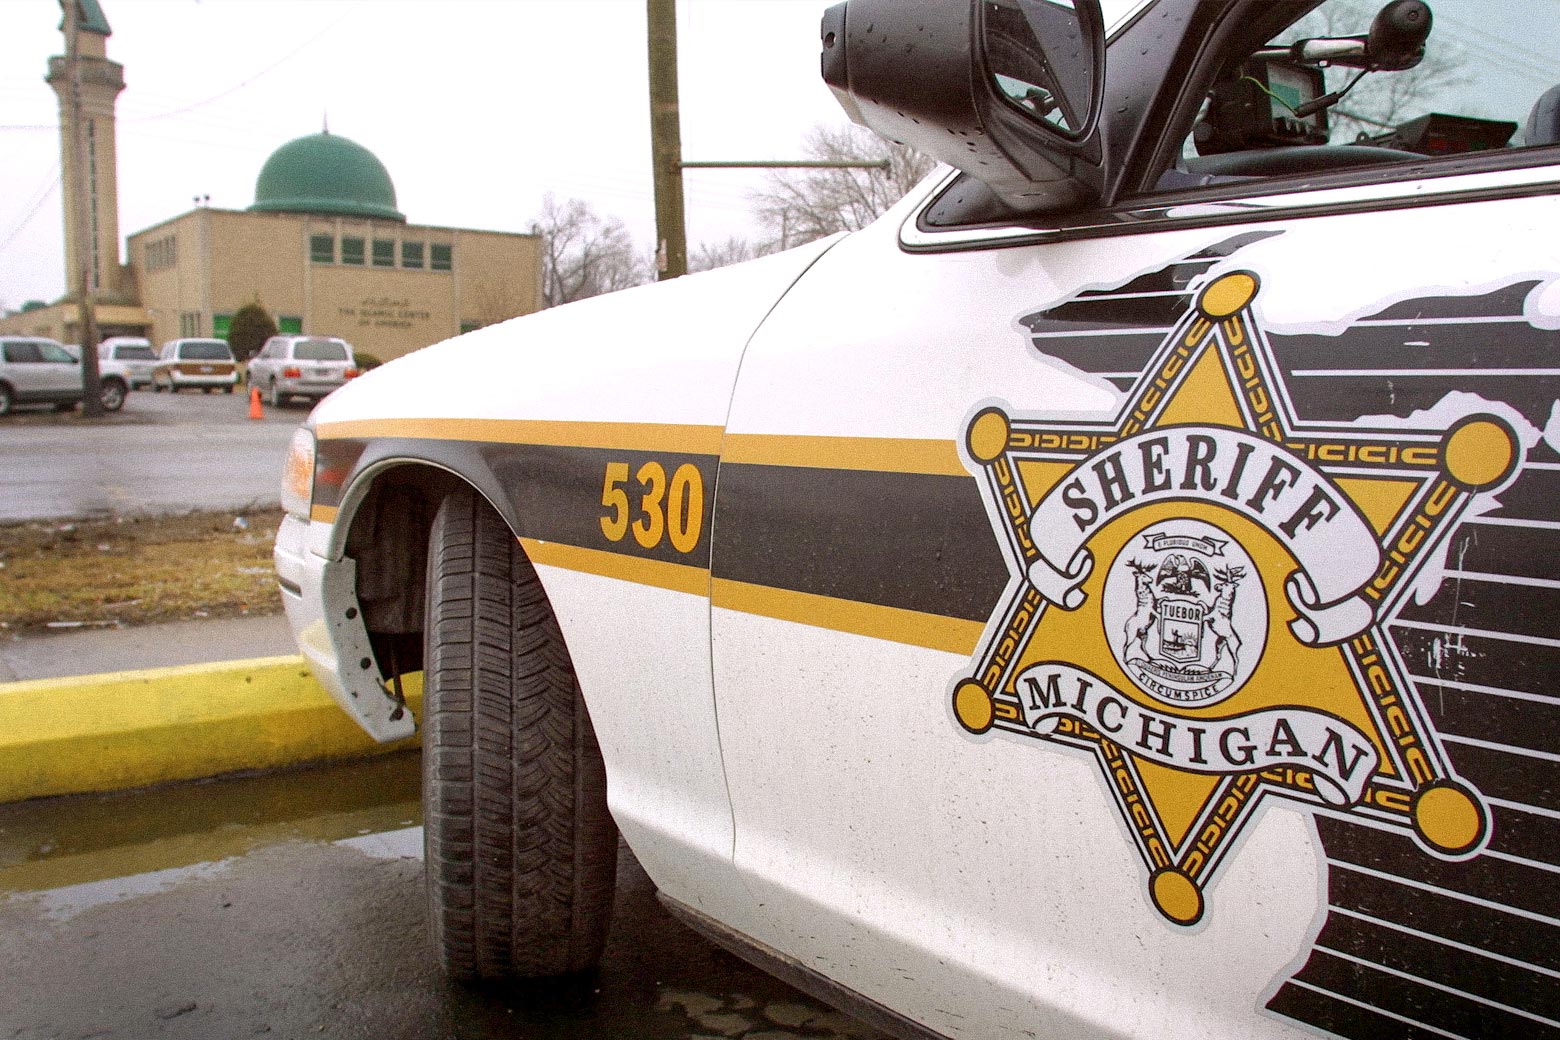 A Wayne County Sheriff's vehicle parked outside an Islamic center.